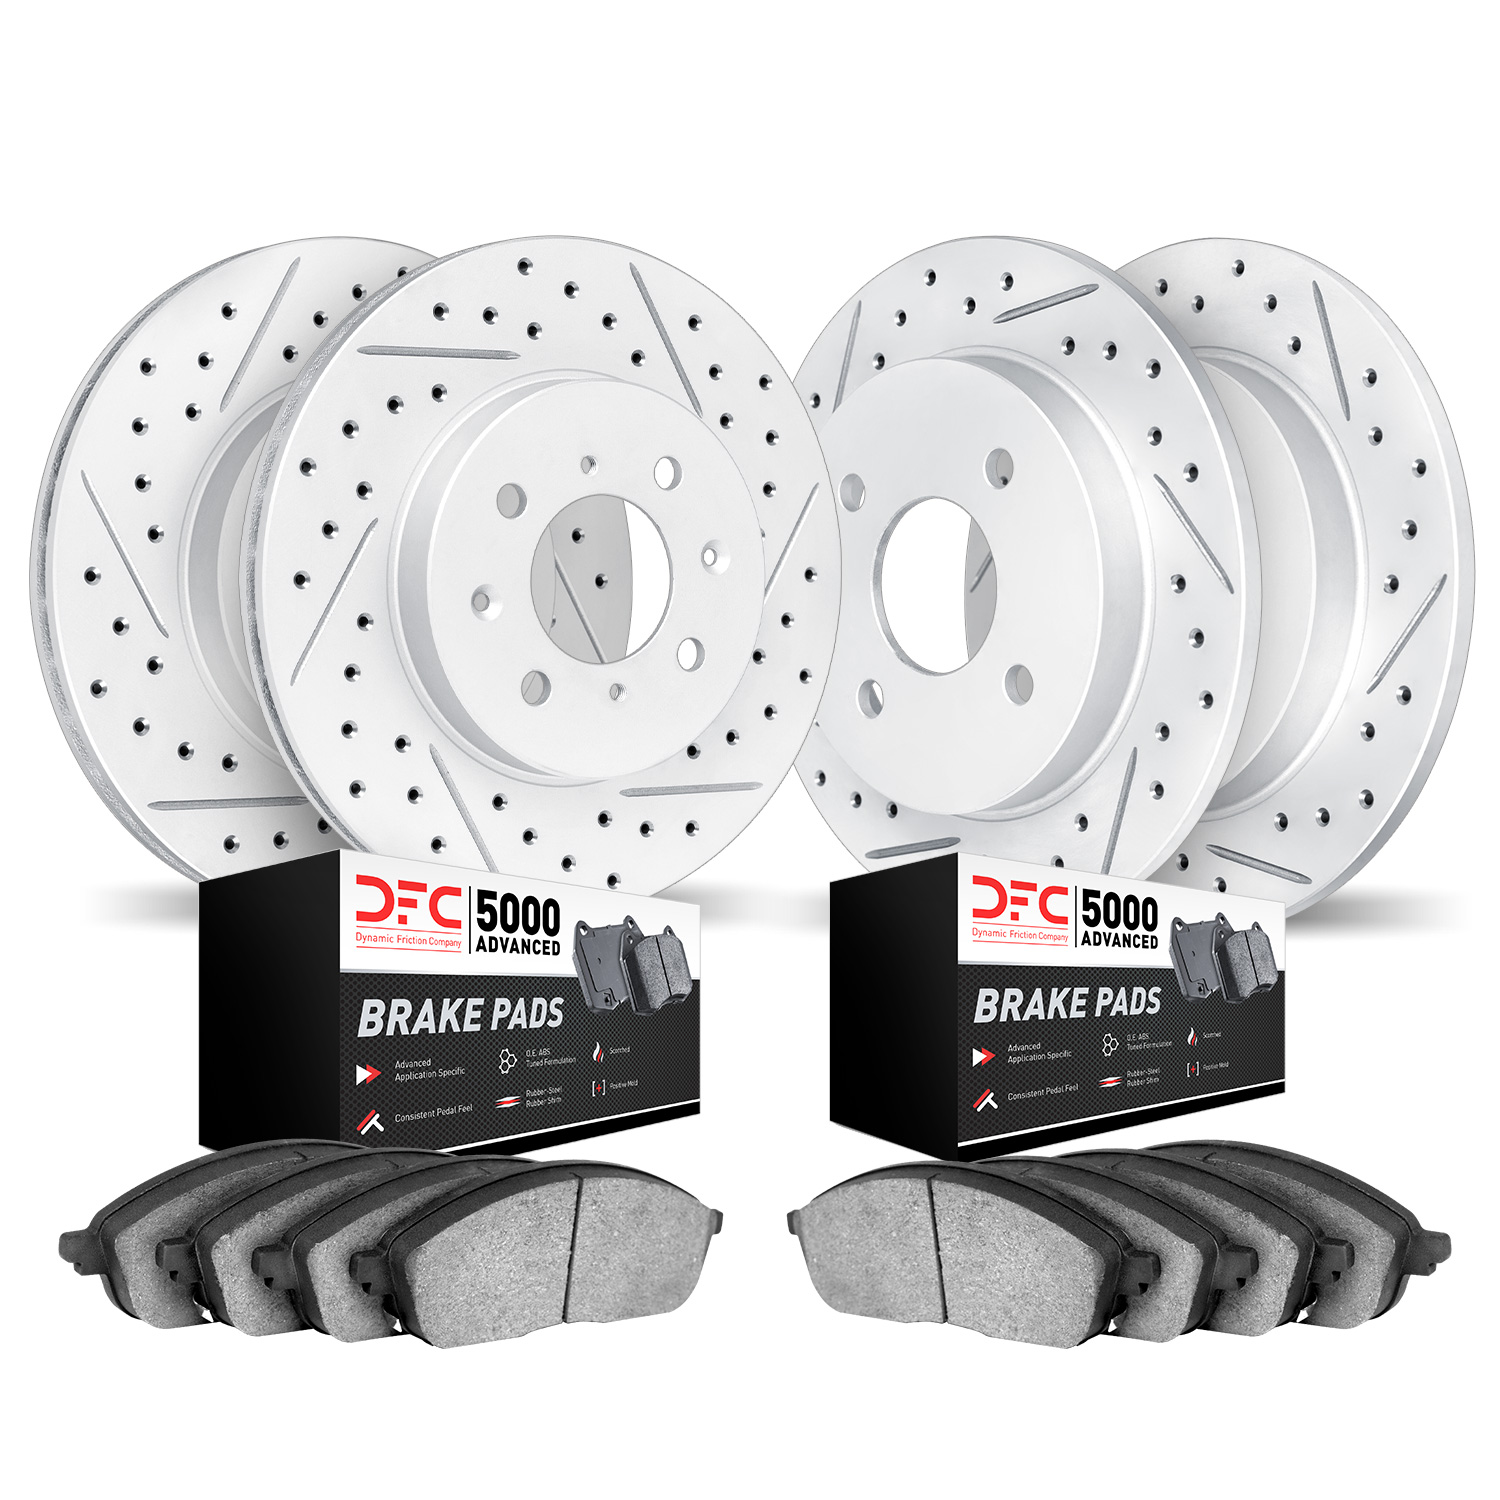 2504-67053 Geoperformance Drilled/Slotted Rotors w/5000 Advanced Brake Pads Kit, 1993-2001 Infiniti/Nissan, Position: Front and